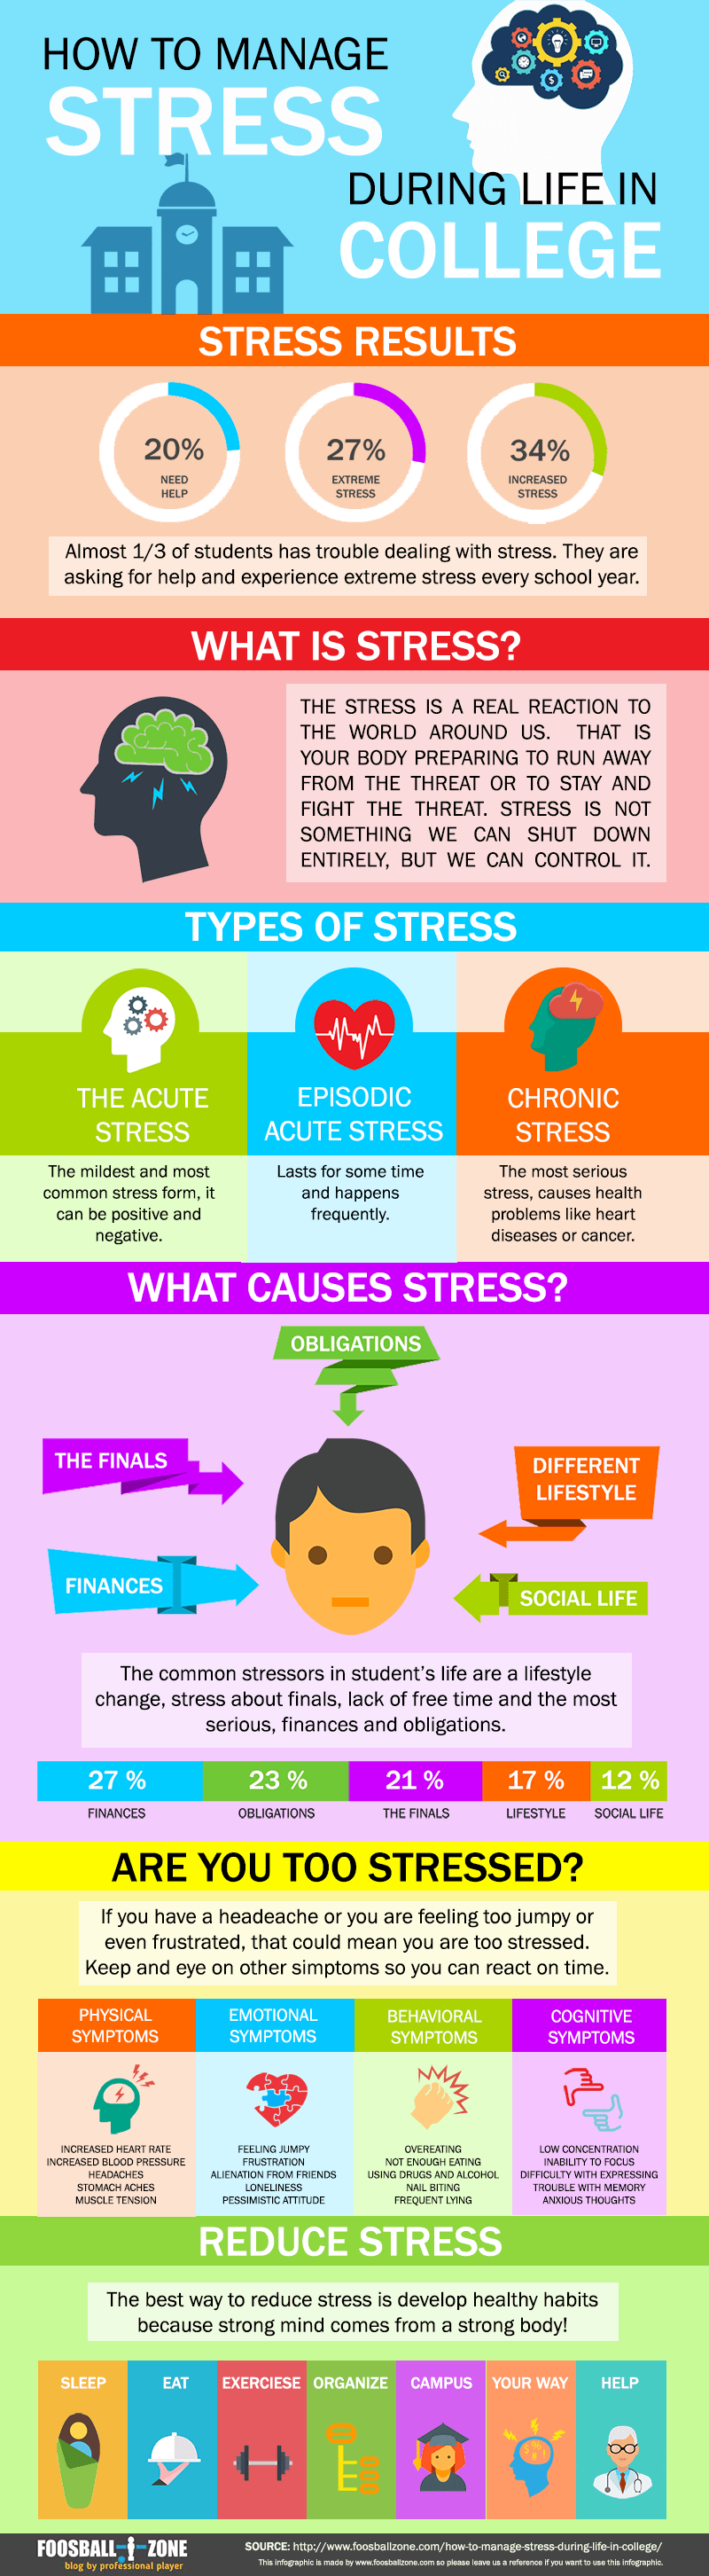 How to manage stress during life in college